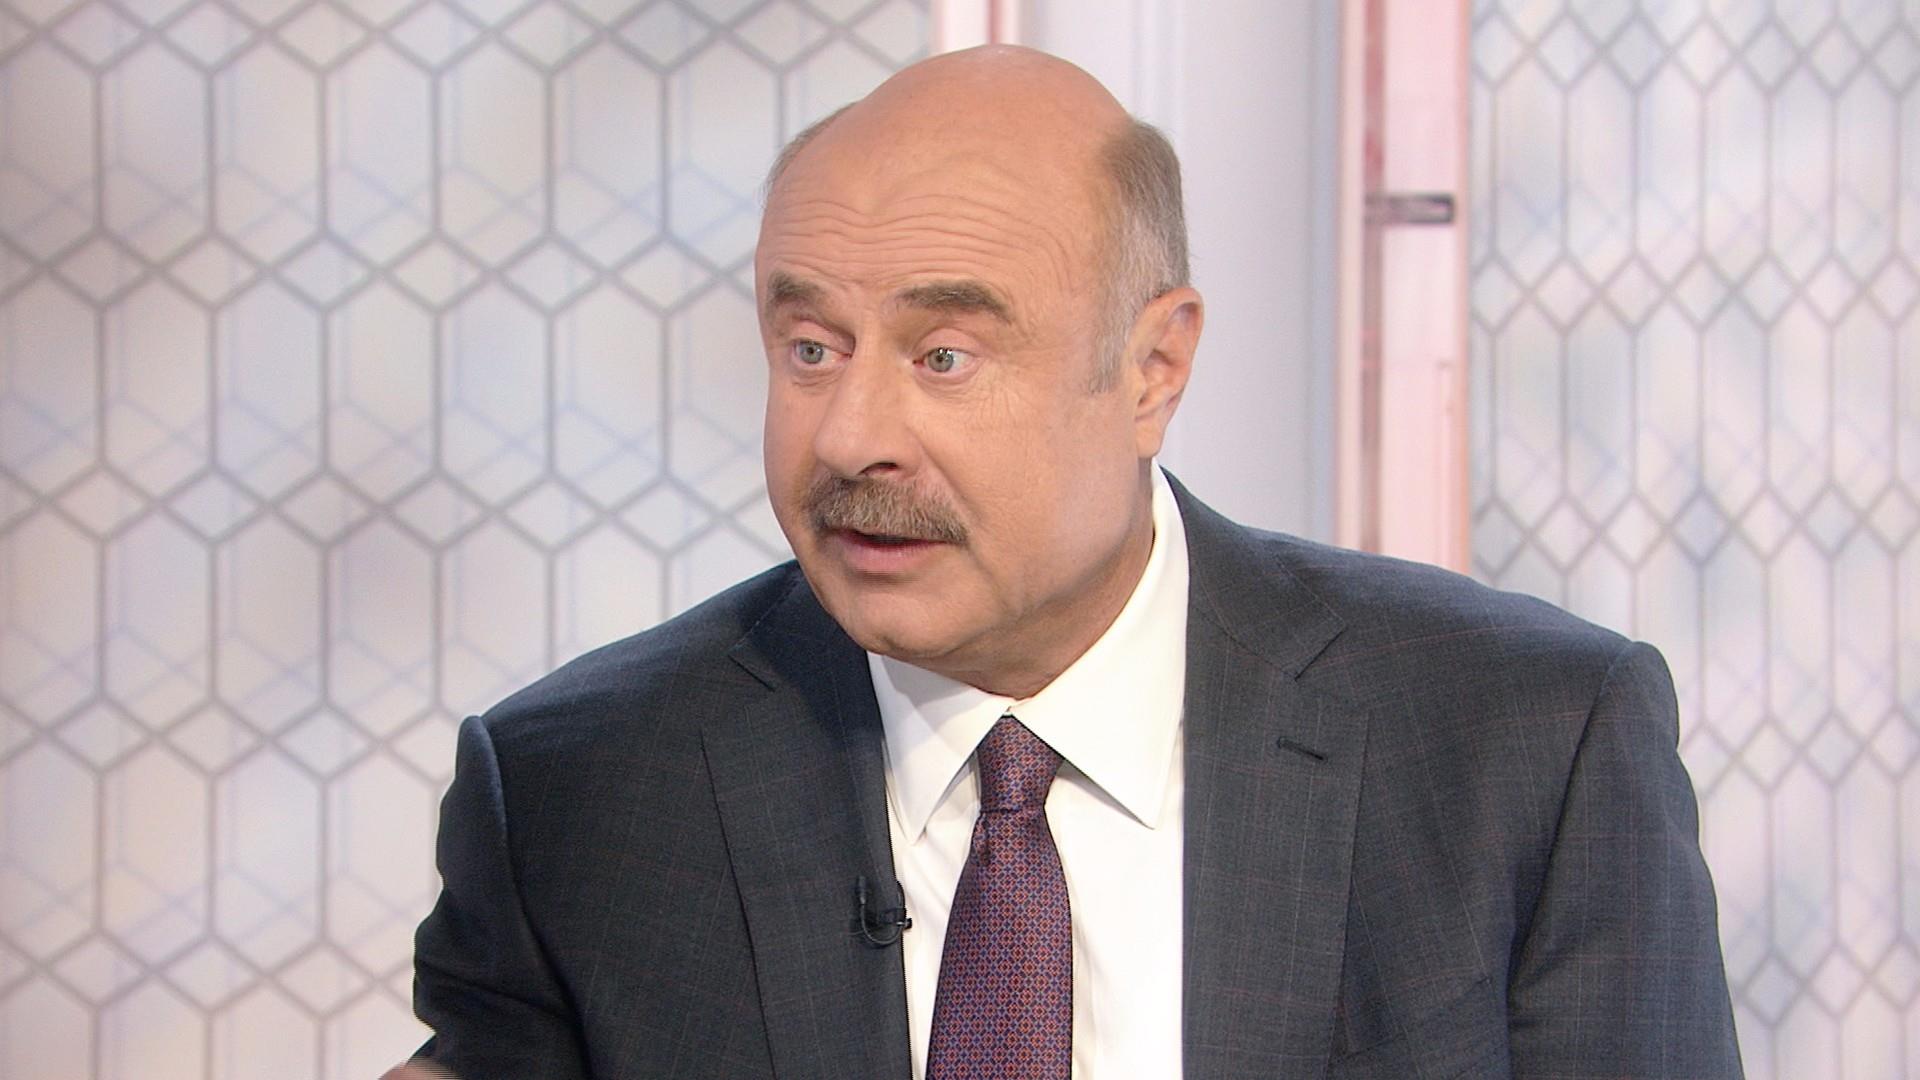 online dating scams dr phil